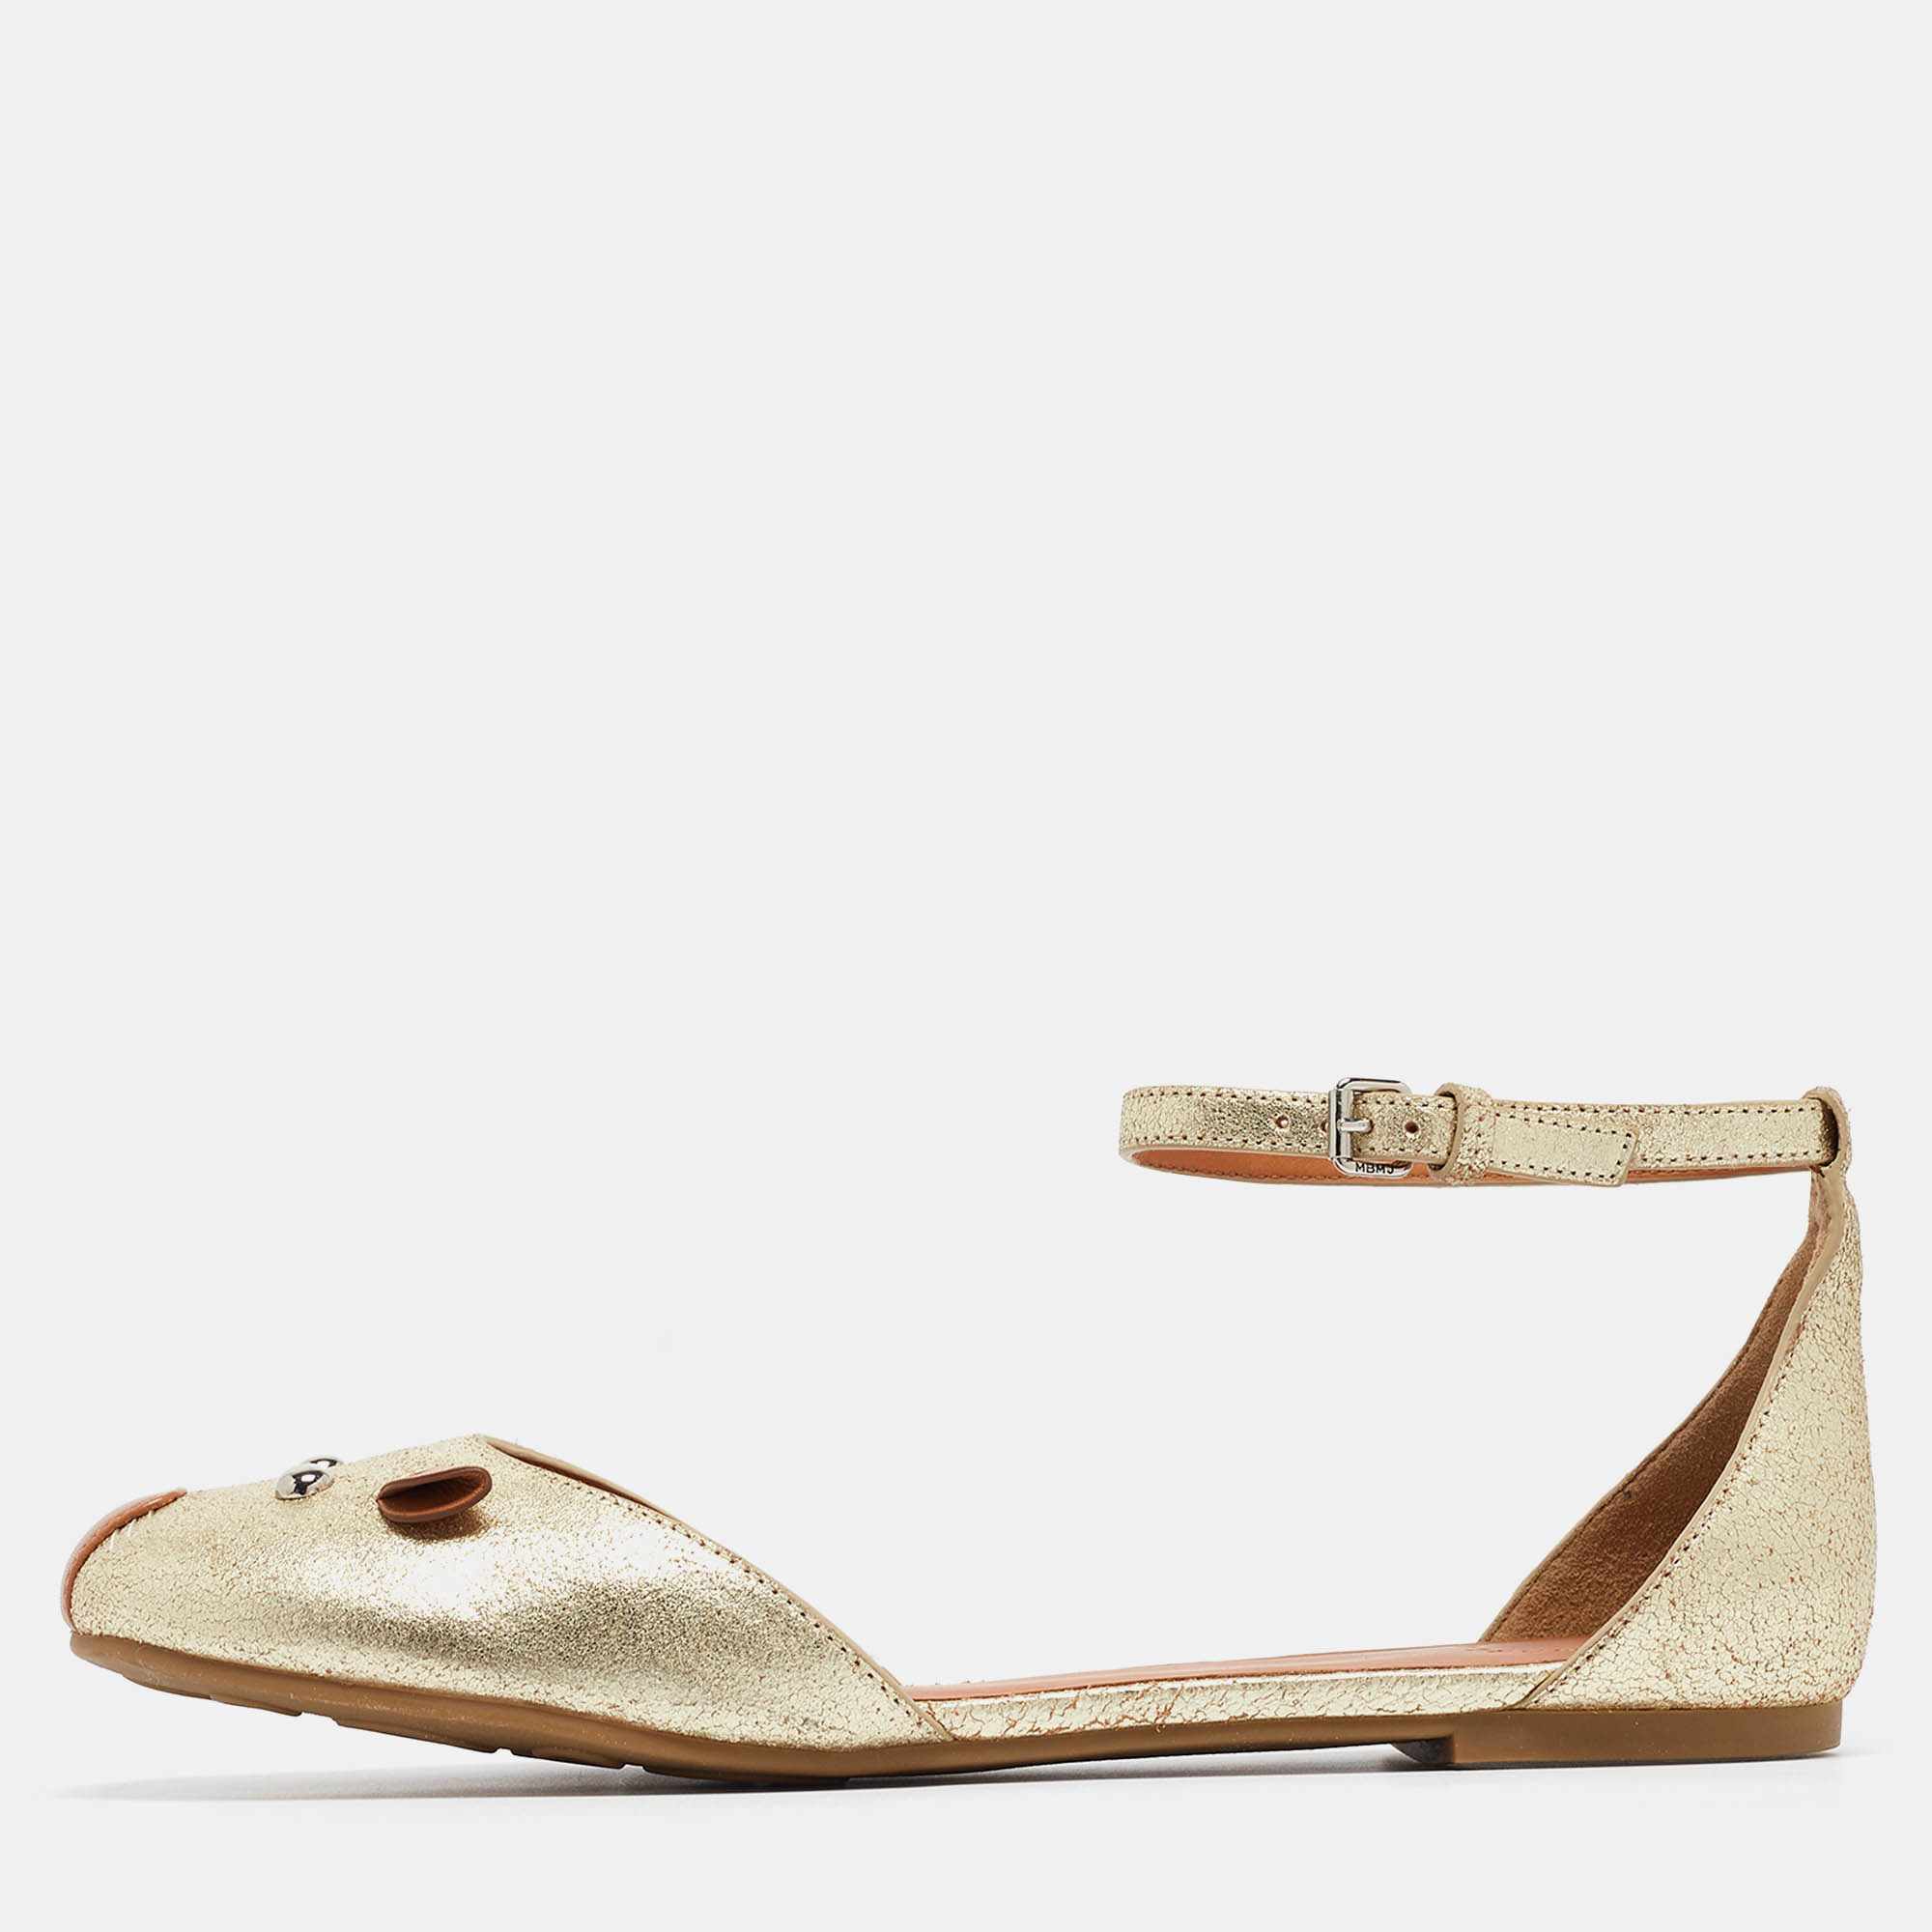 Marc by marc jacobs gold leather mouse ankle strap flats size 39.5